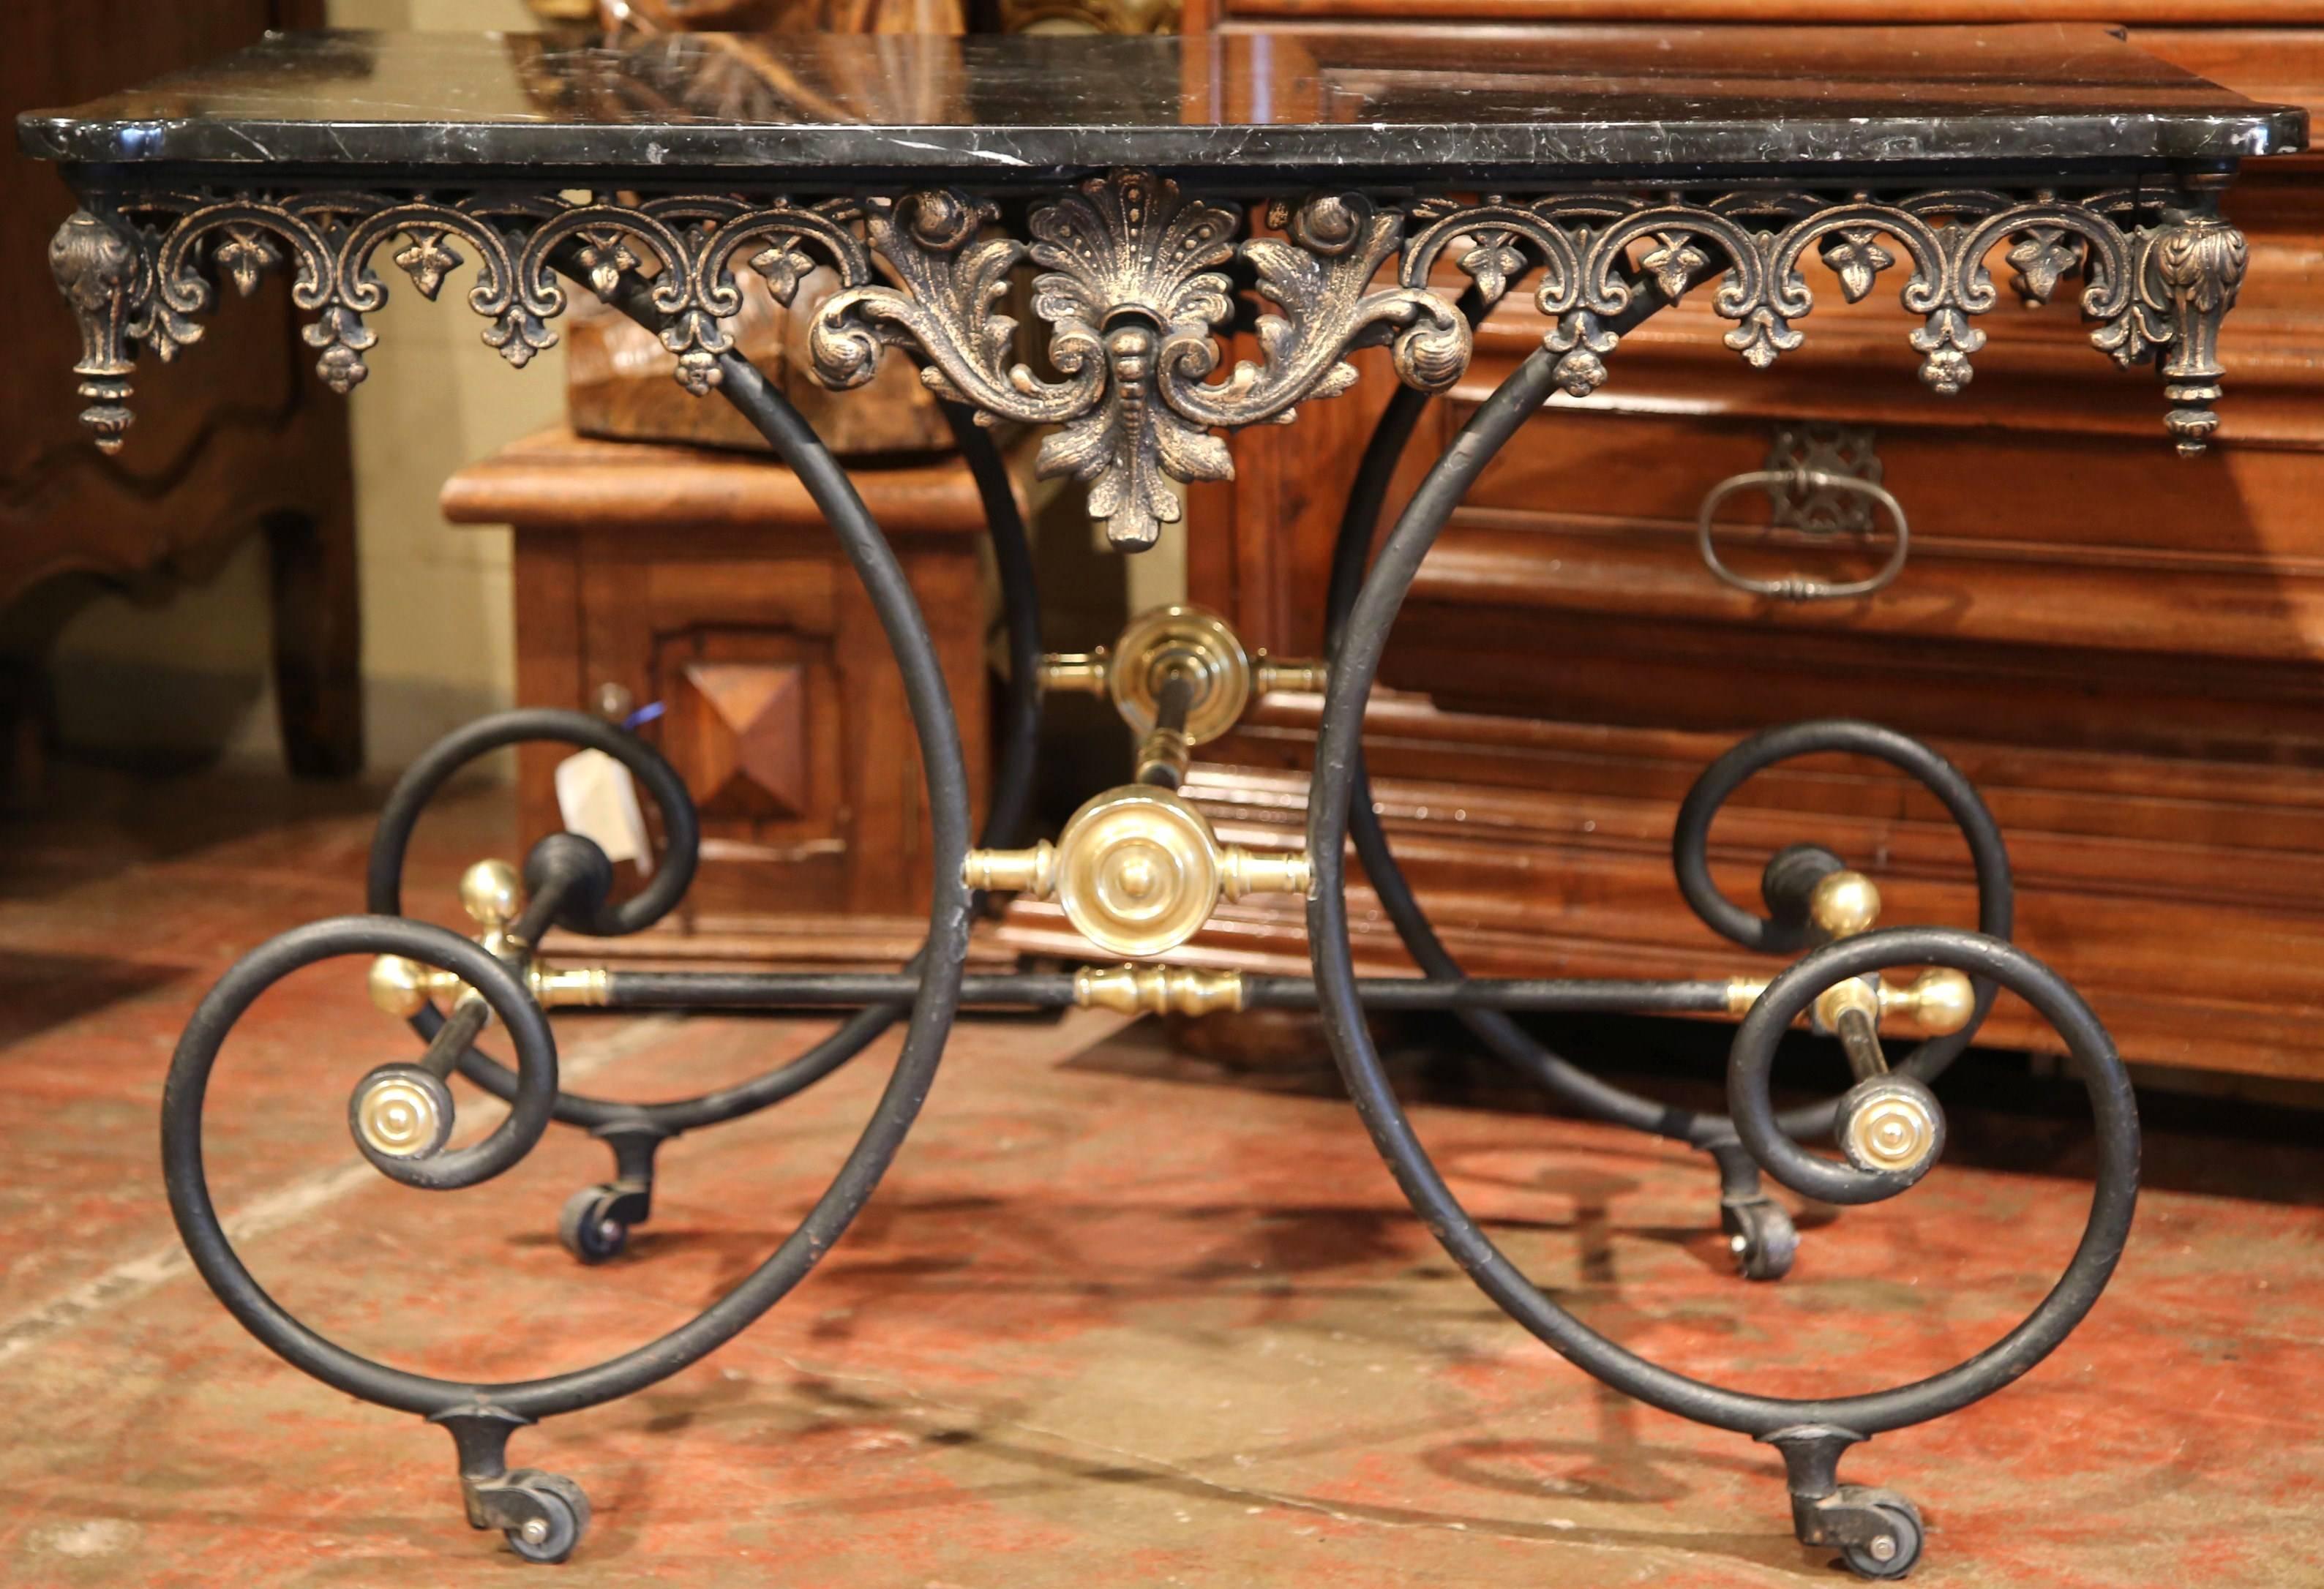 This elegant, vintage butcher table (or pastry table), was crafted in France, circa 1950. The iron table on wheels, has intricate carving on the apron, beautifully scrolled legs and fine bronze decorative mounts. The embellished frame is topped with